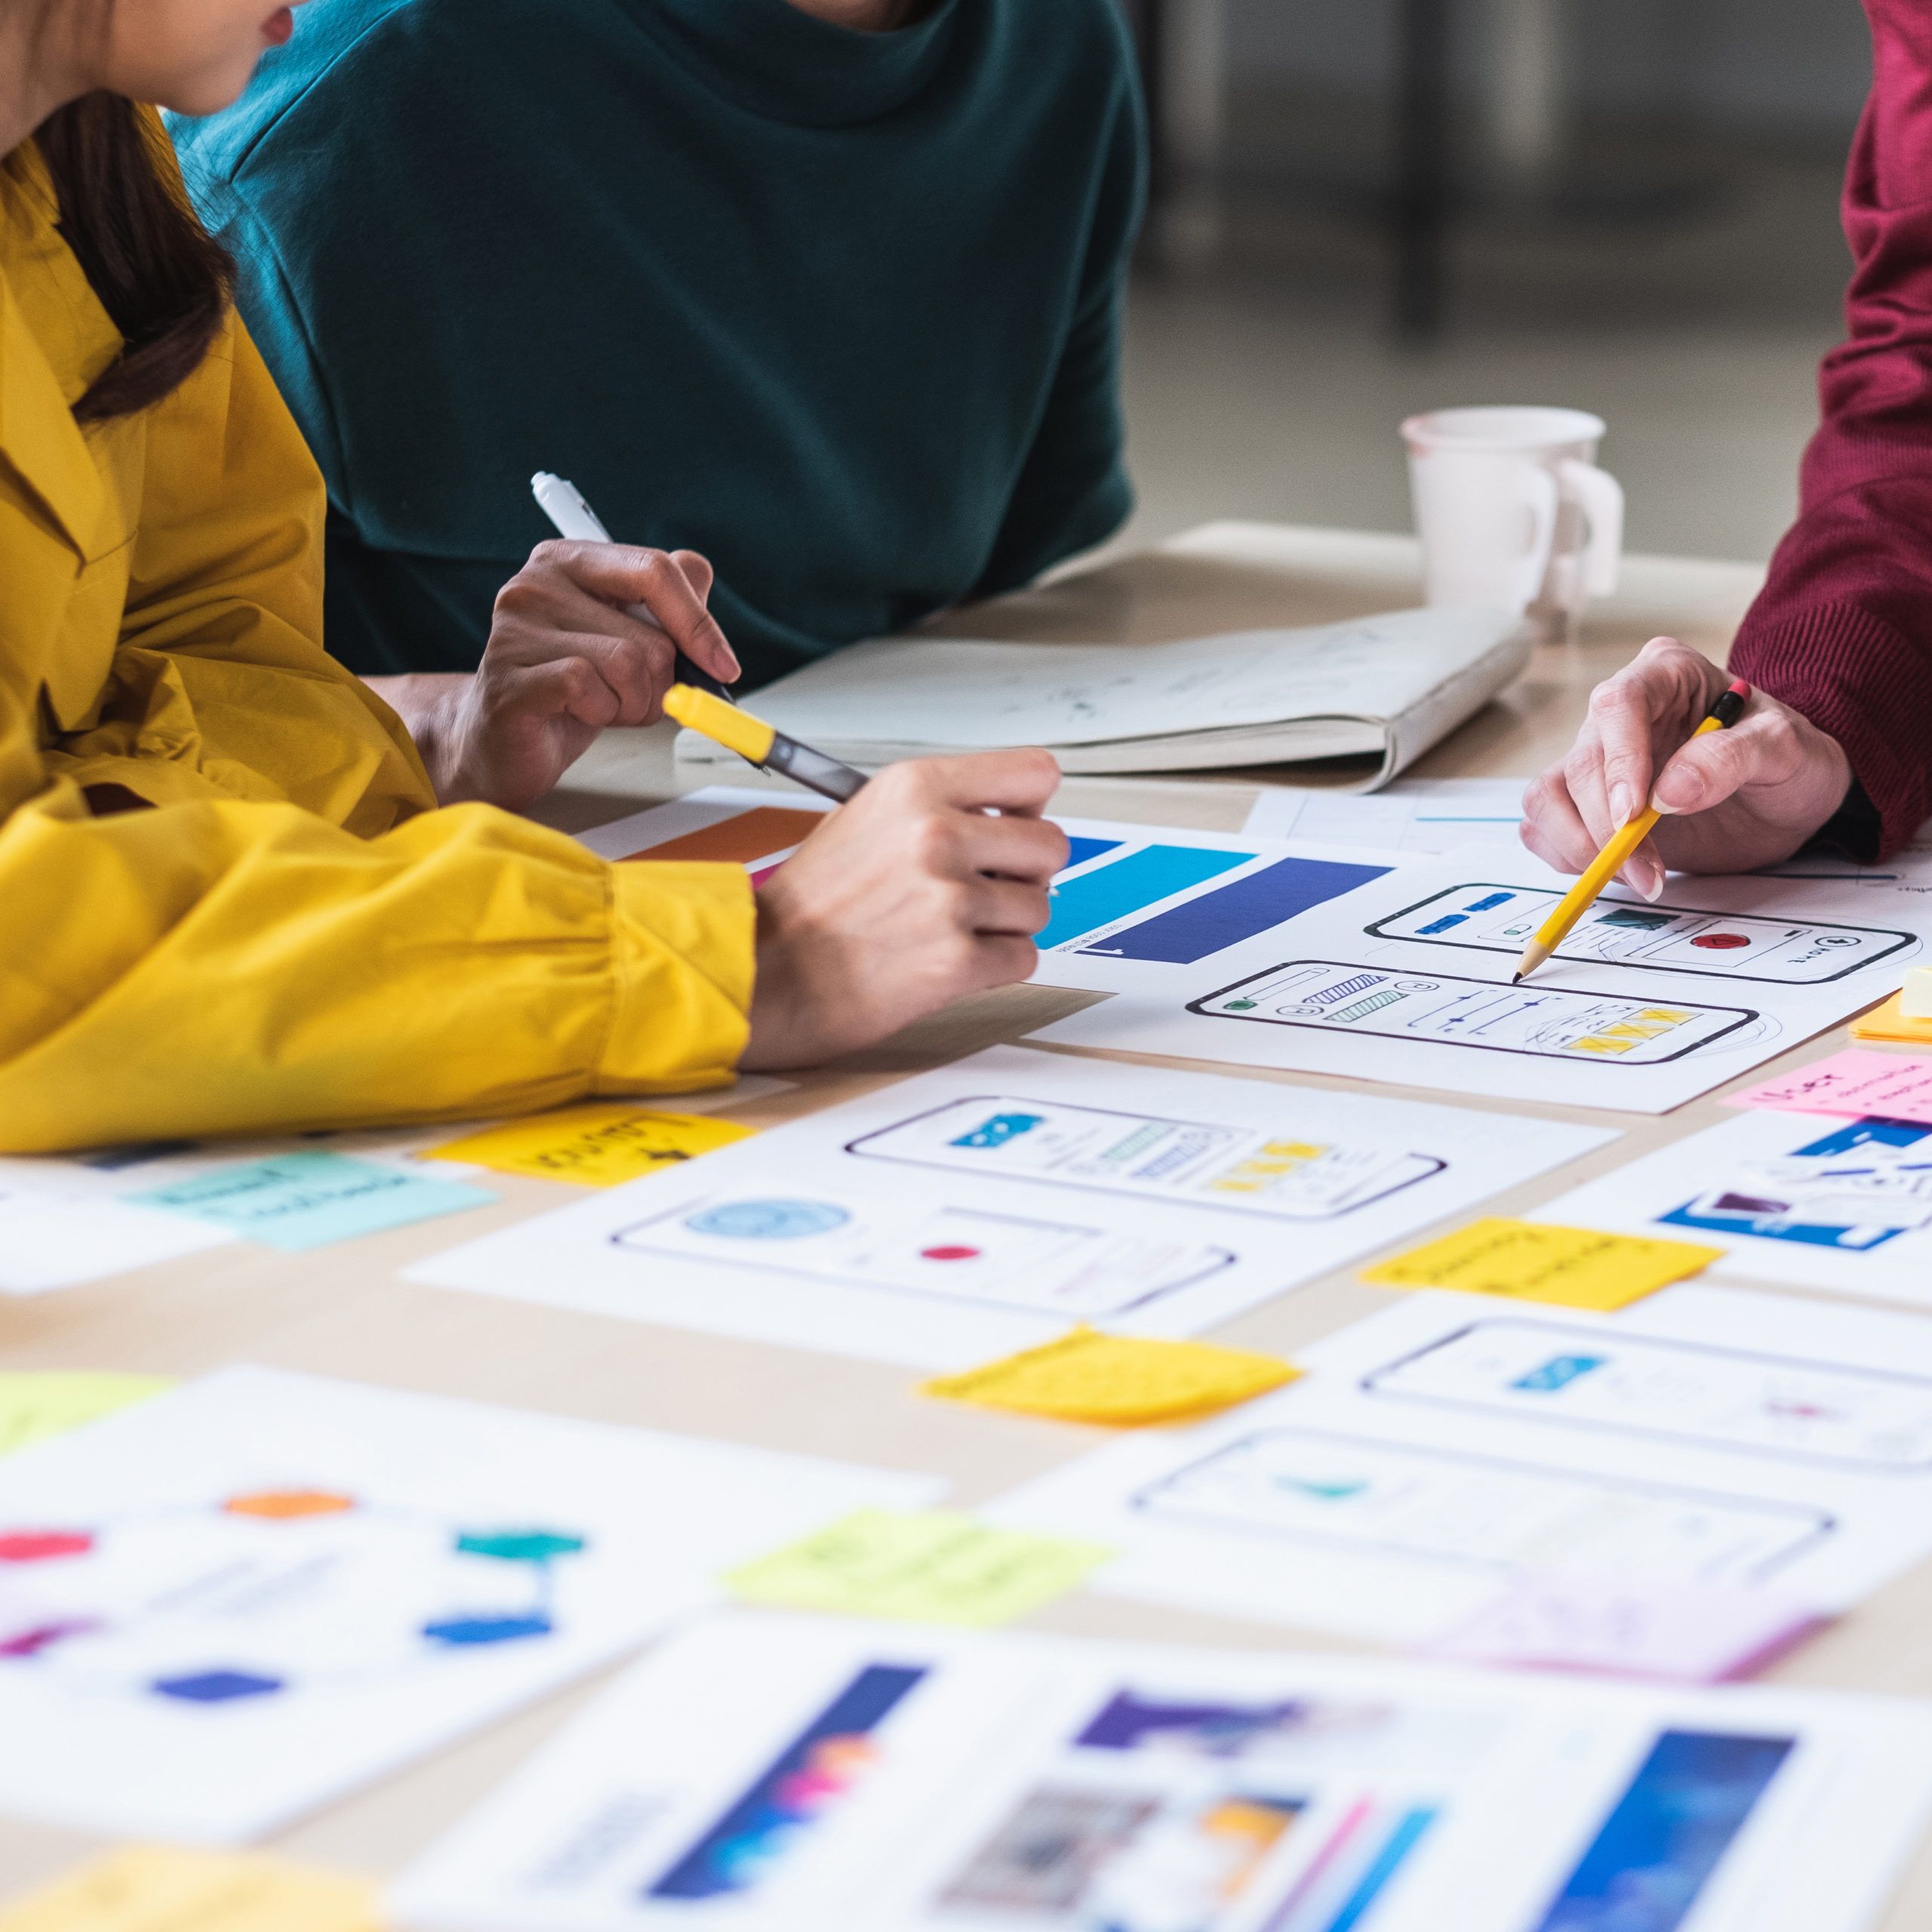 Close up look at agency working on UX design, with many colorful designs/charts on table